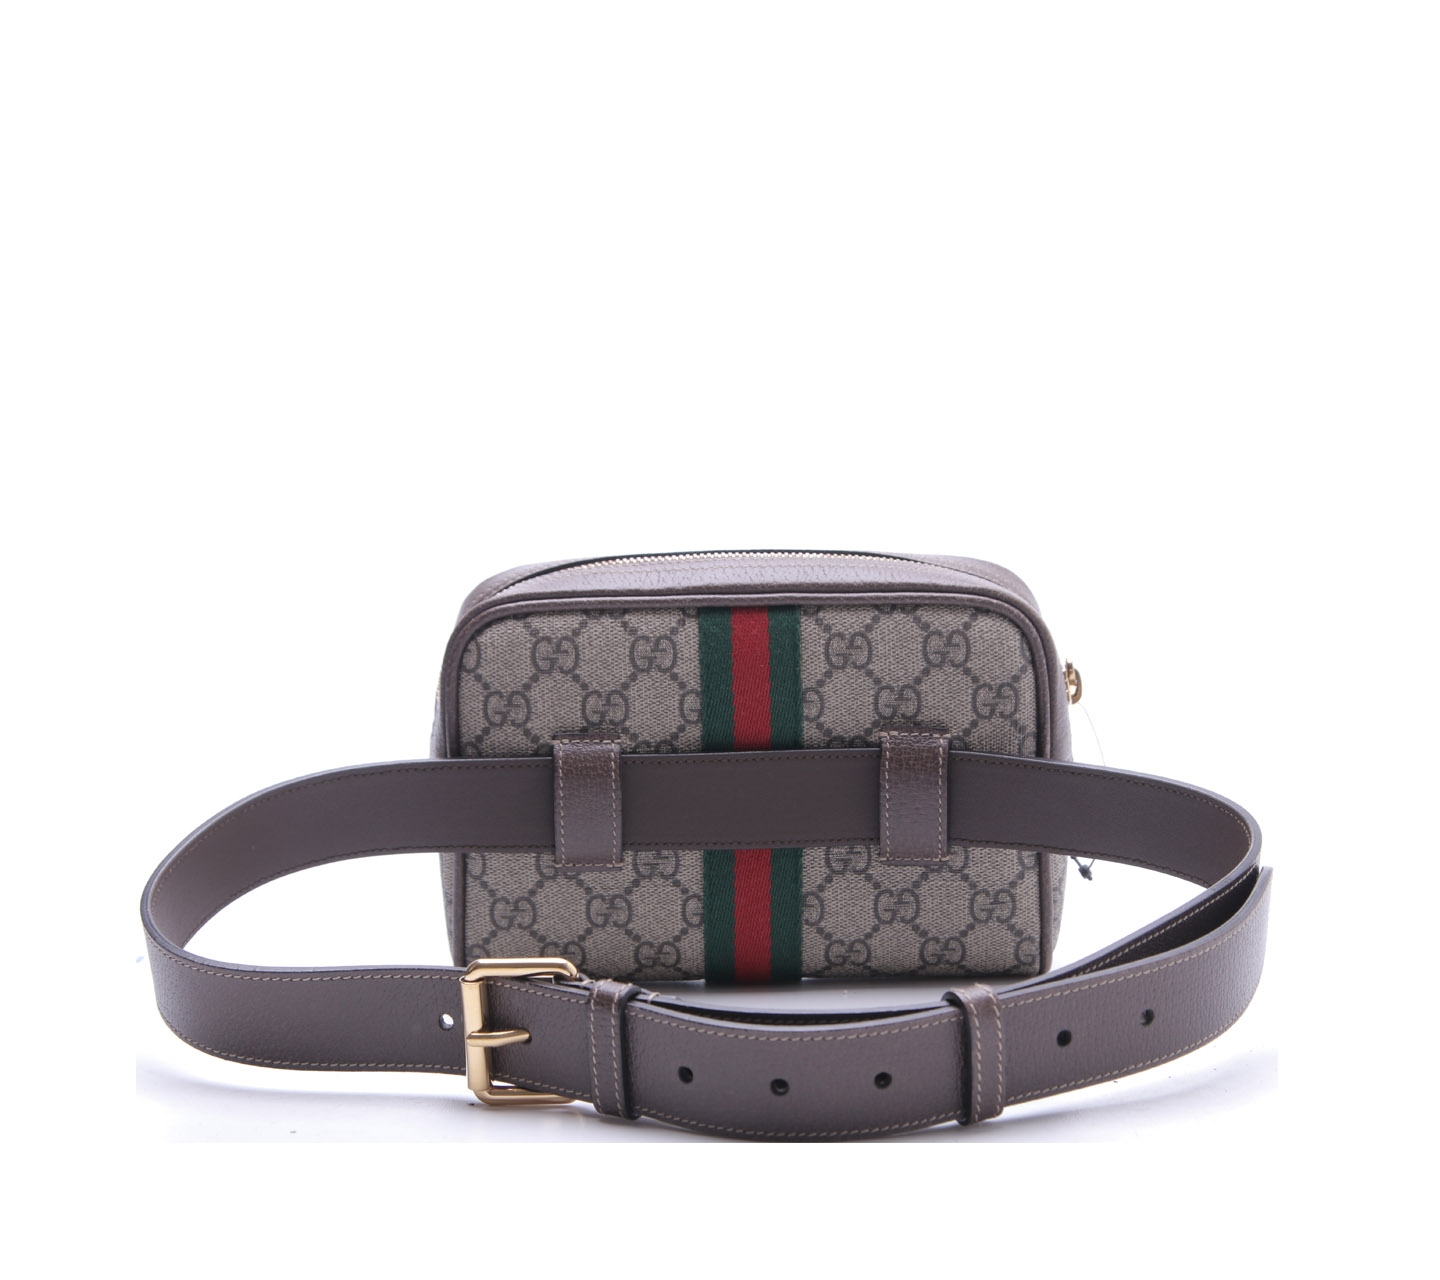 Gucci Brown Ophidia GG Supreme Small Belt Bag